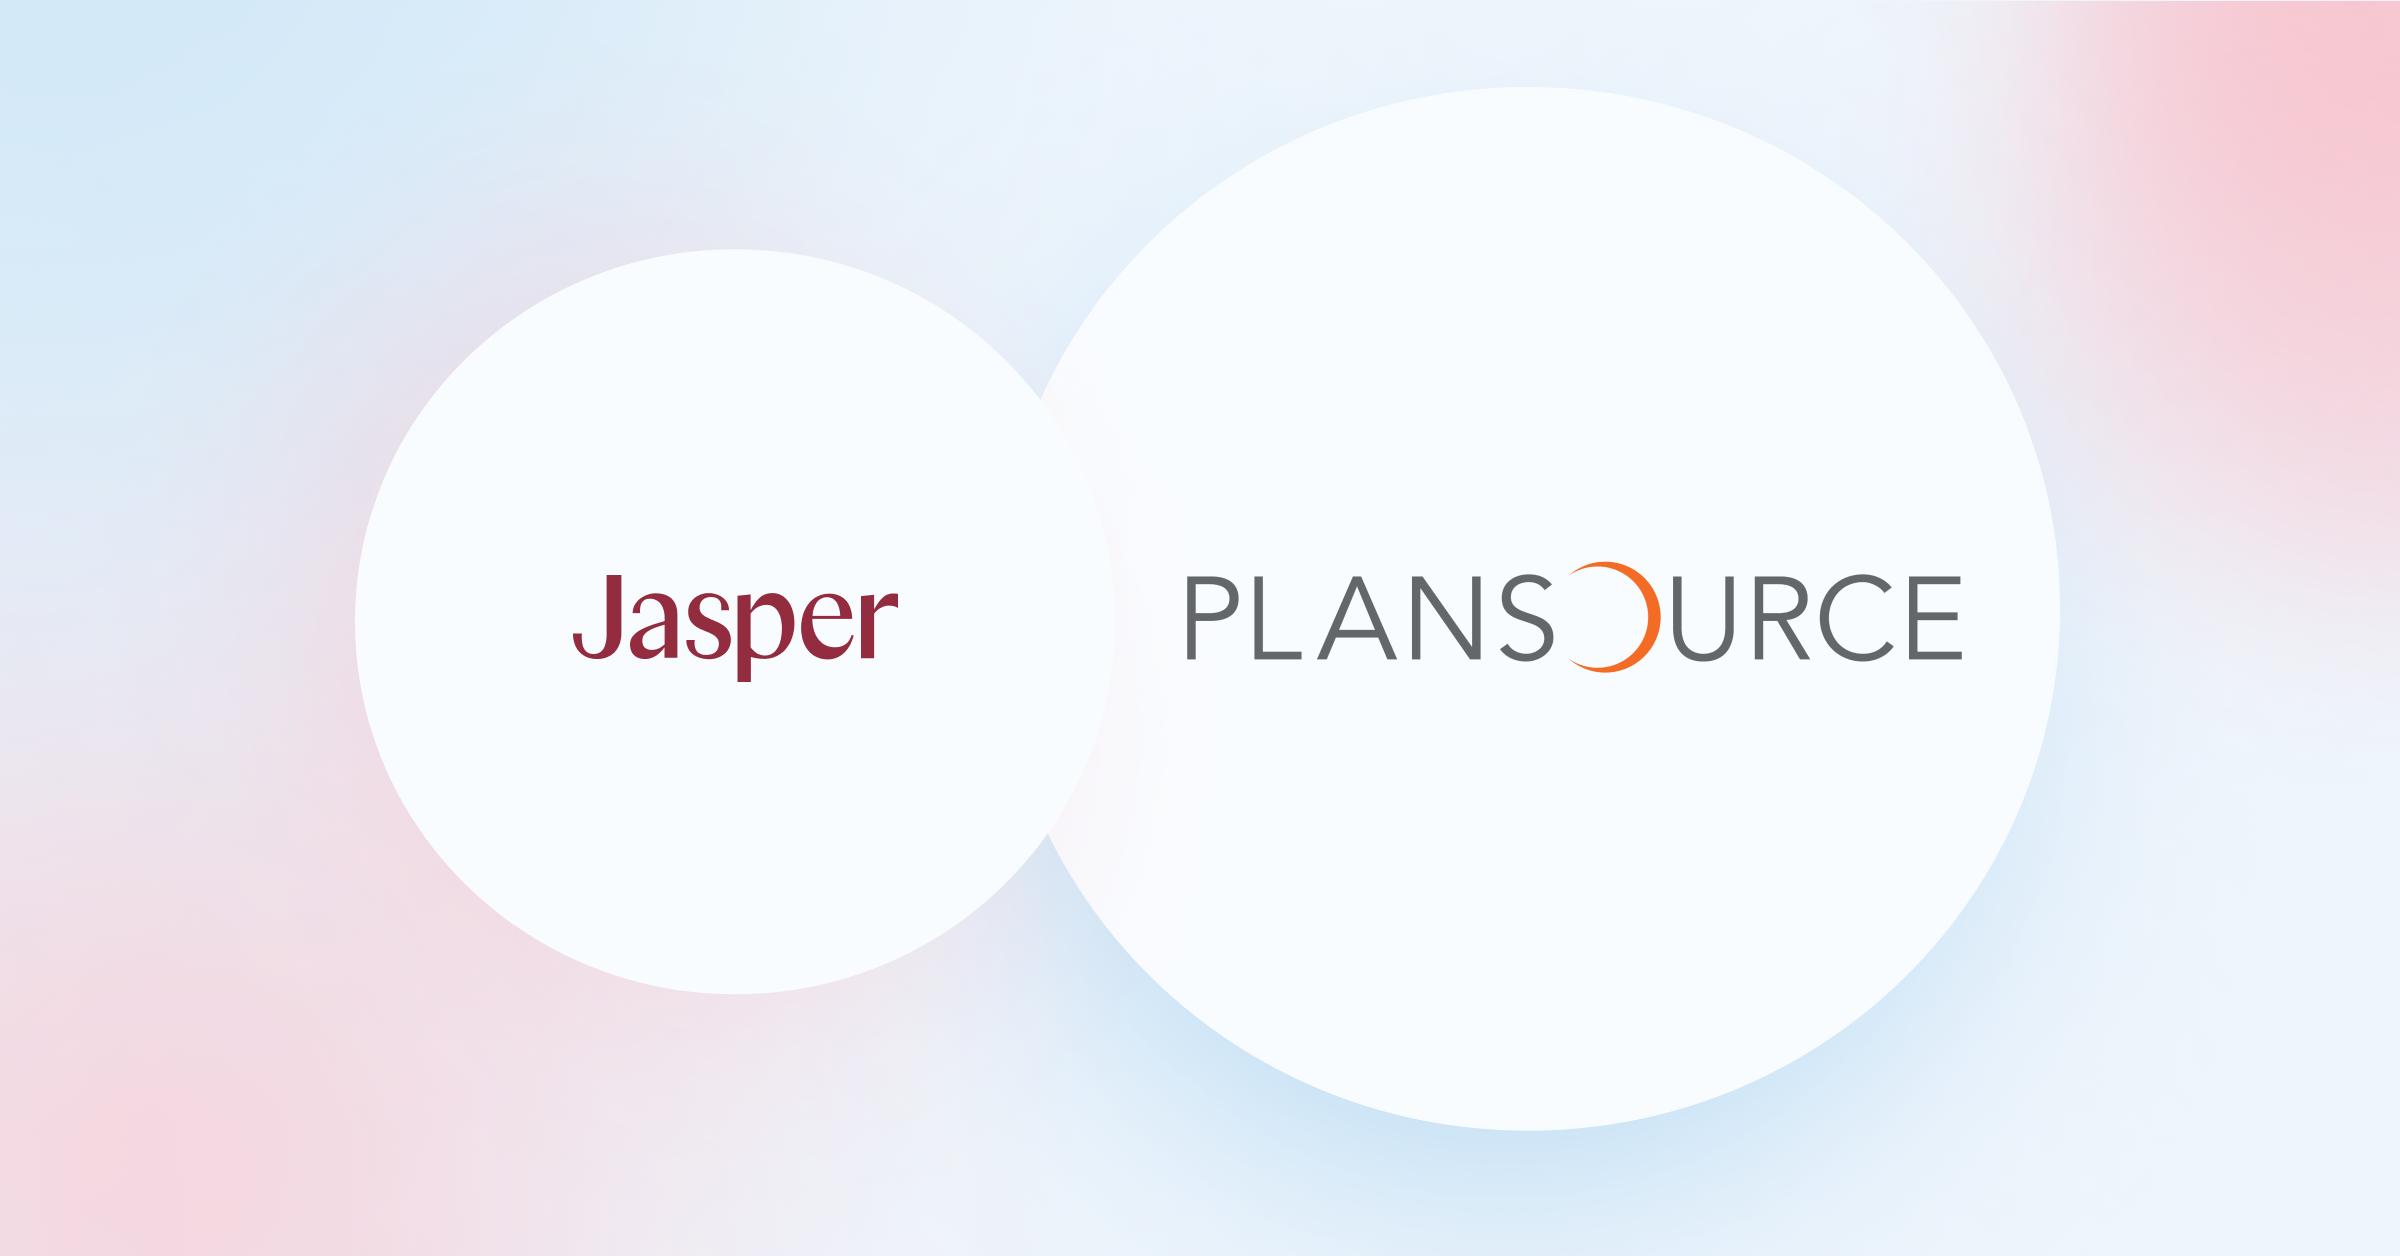 Jasper logo and Plansource logo within two white circles